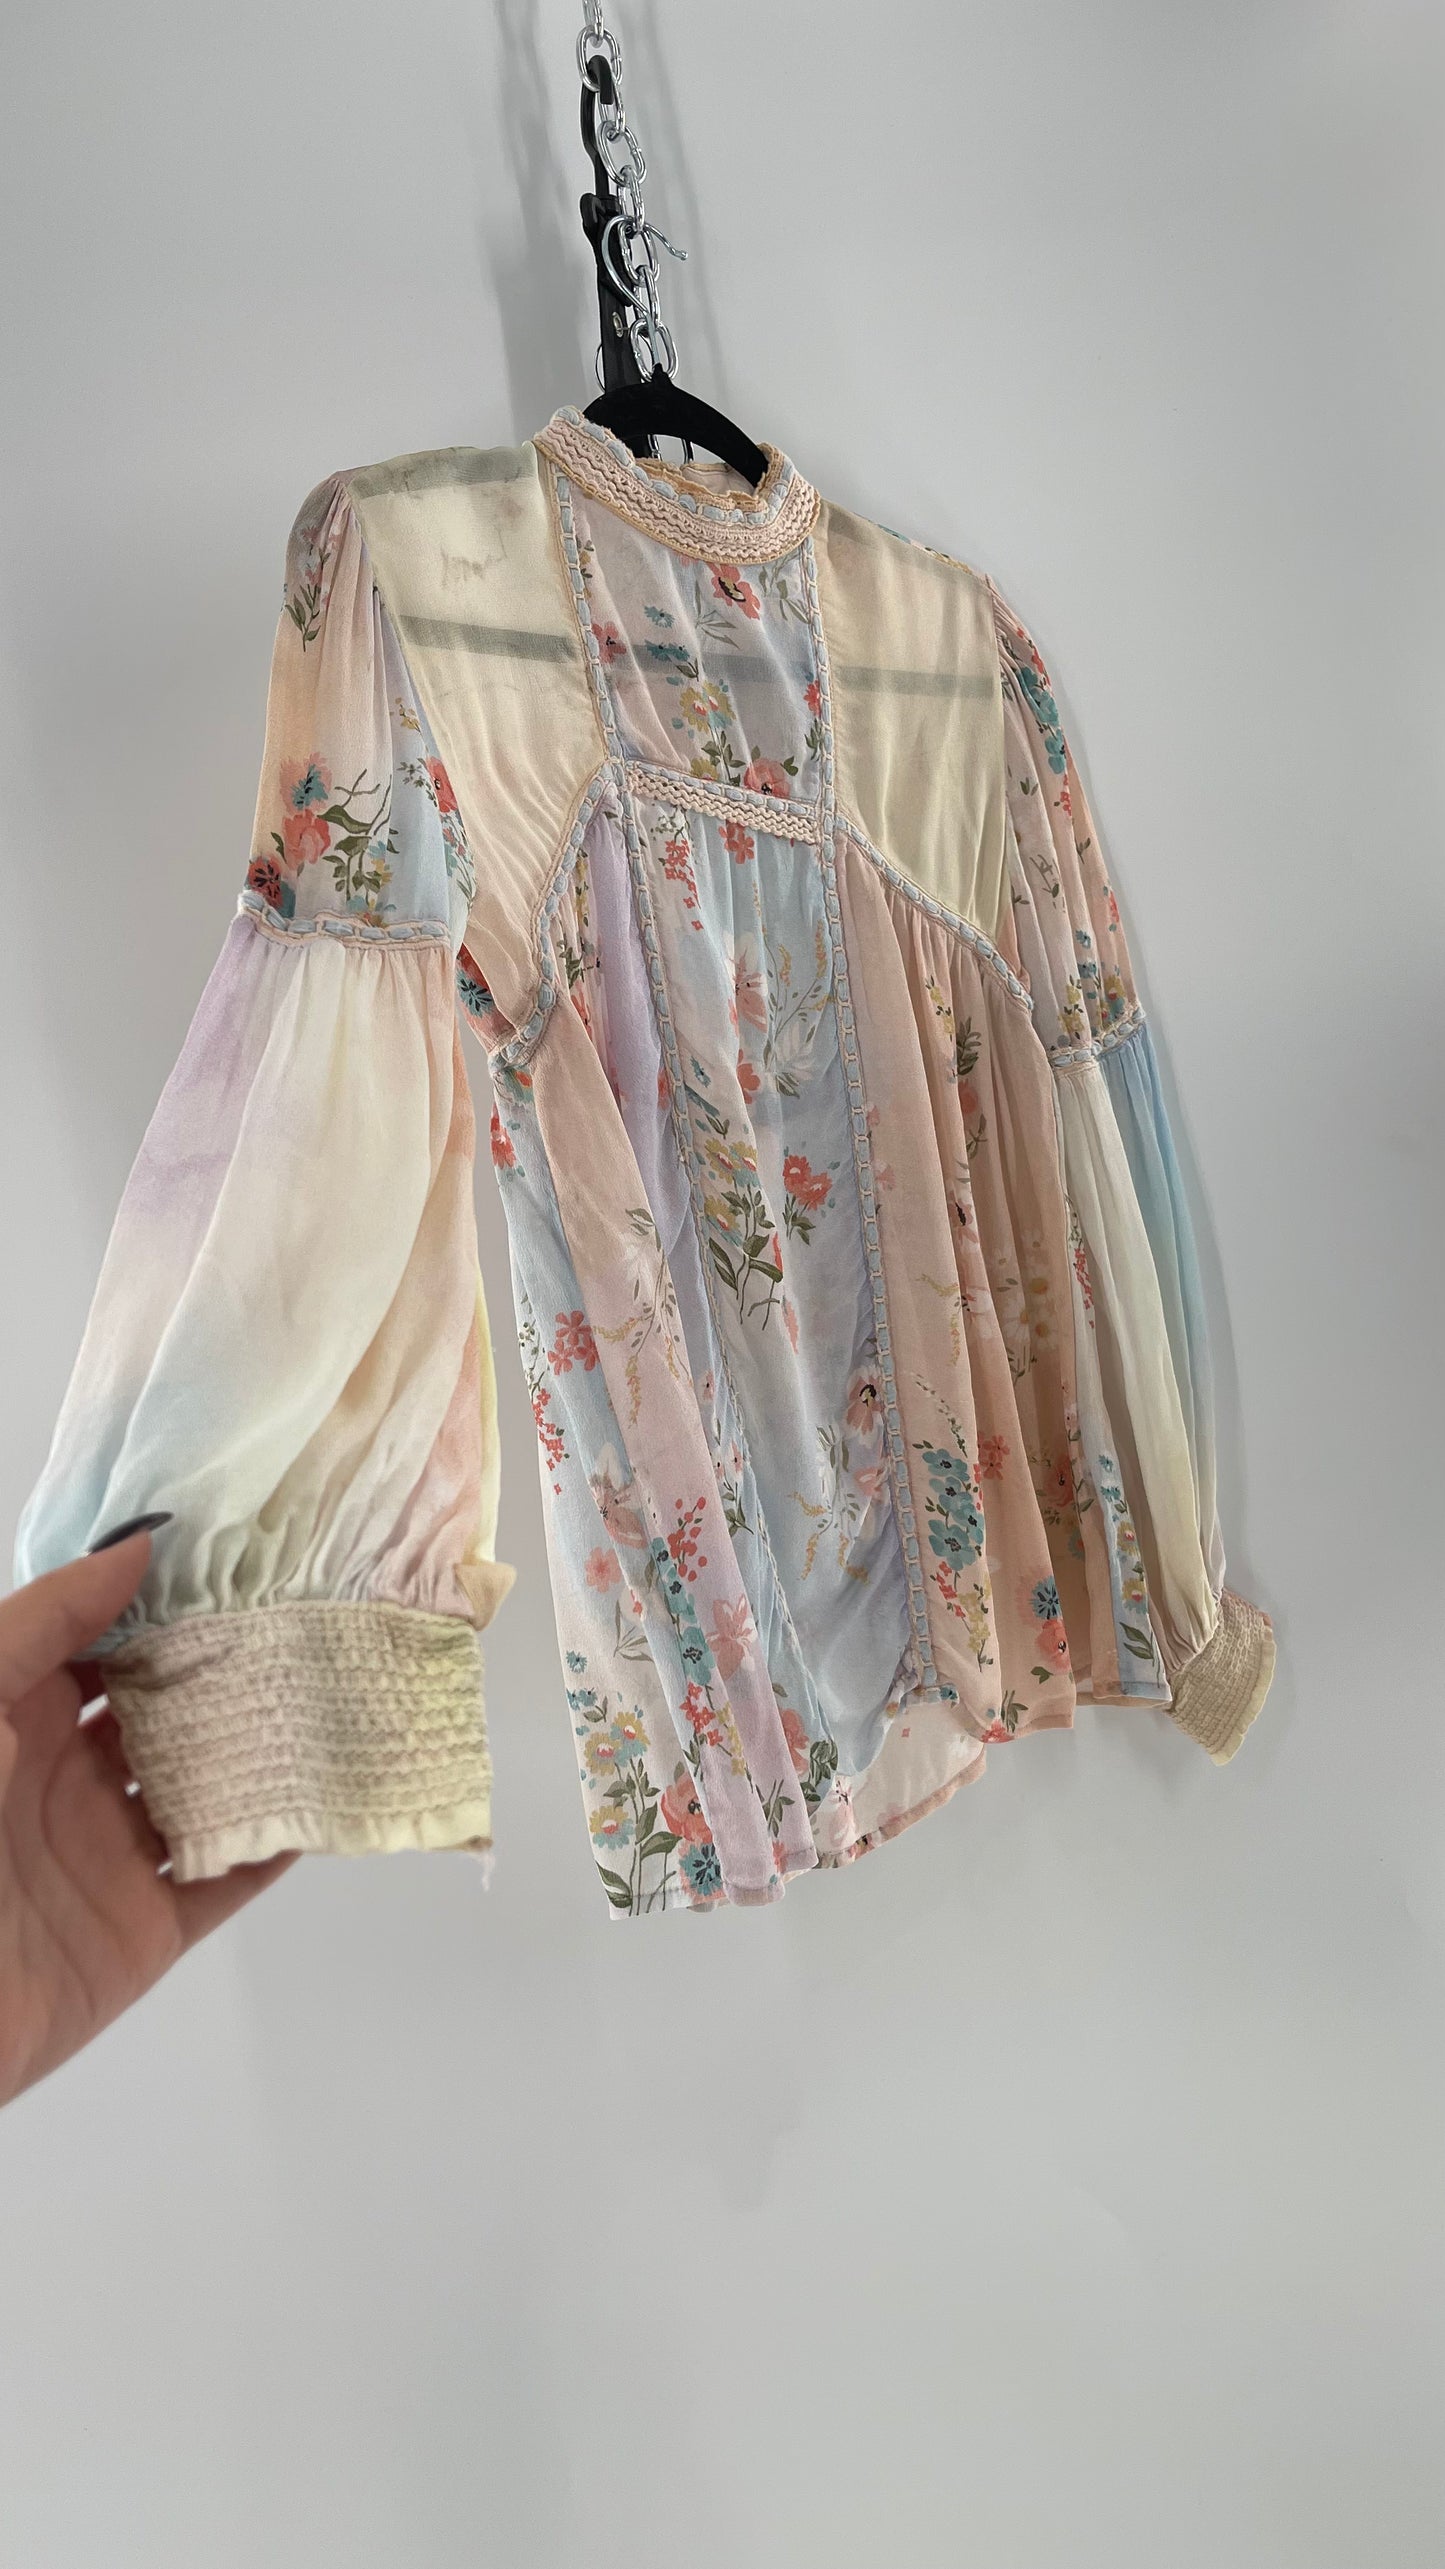 Bl^nk London Anthropologie Pastel Patchwork Blouse (Small)